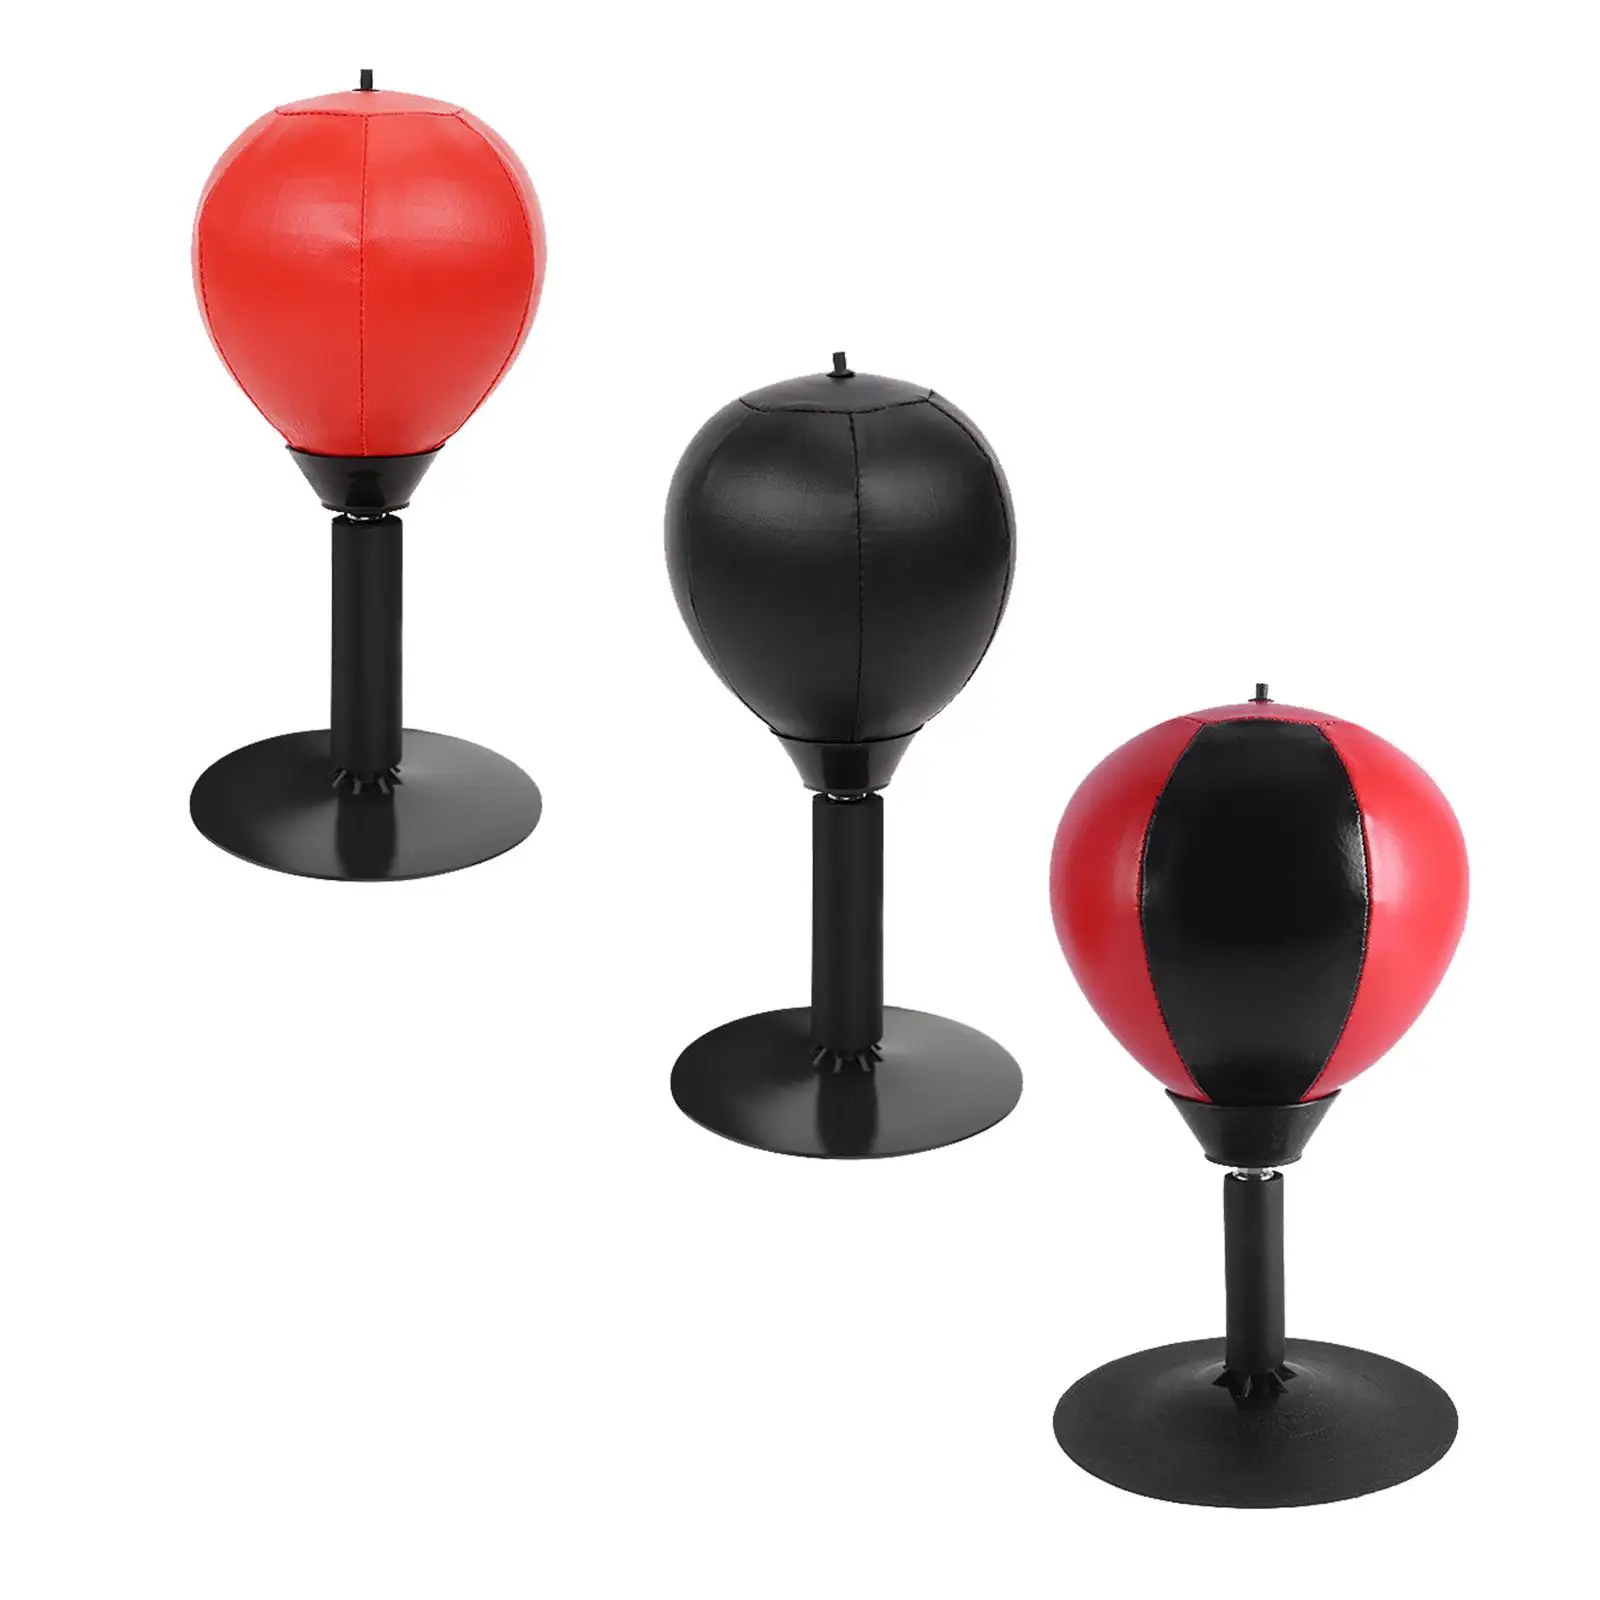 PU Punching Bag Speed Ball Suction Cup Freestanding Desktop Boxing Ball for Boxing Training Exercise Practice Fitness Equipment